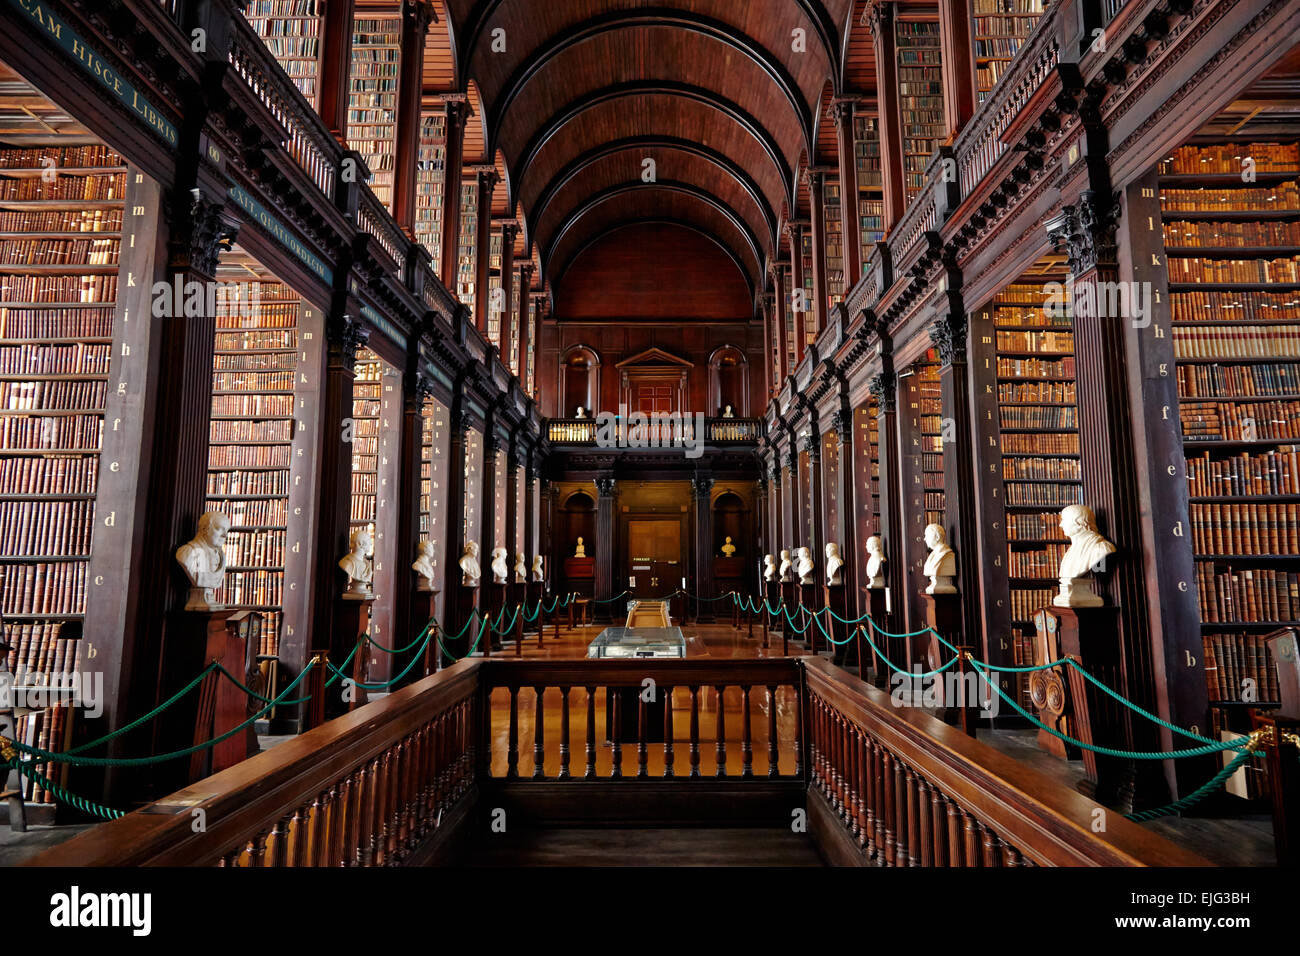 The long Room, Old Library of Trinity College Dublin, Irlande Banque D'Images